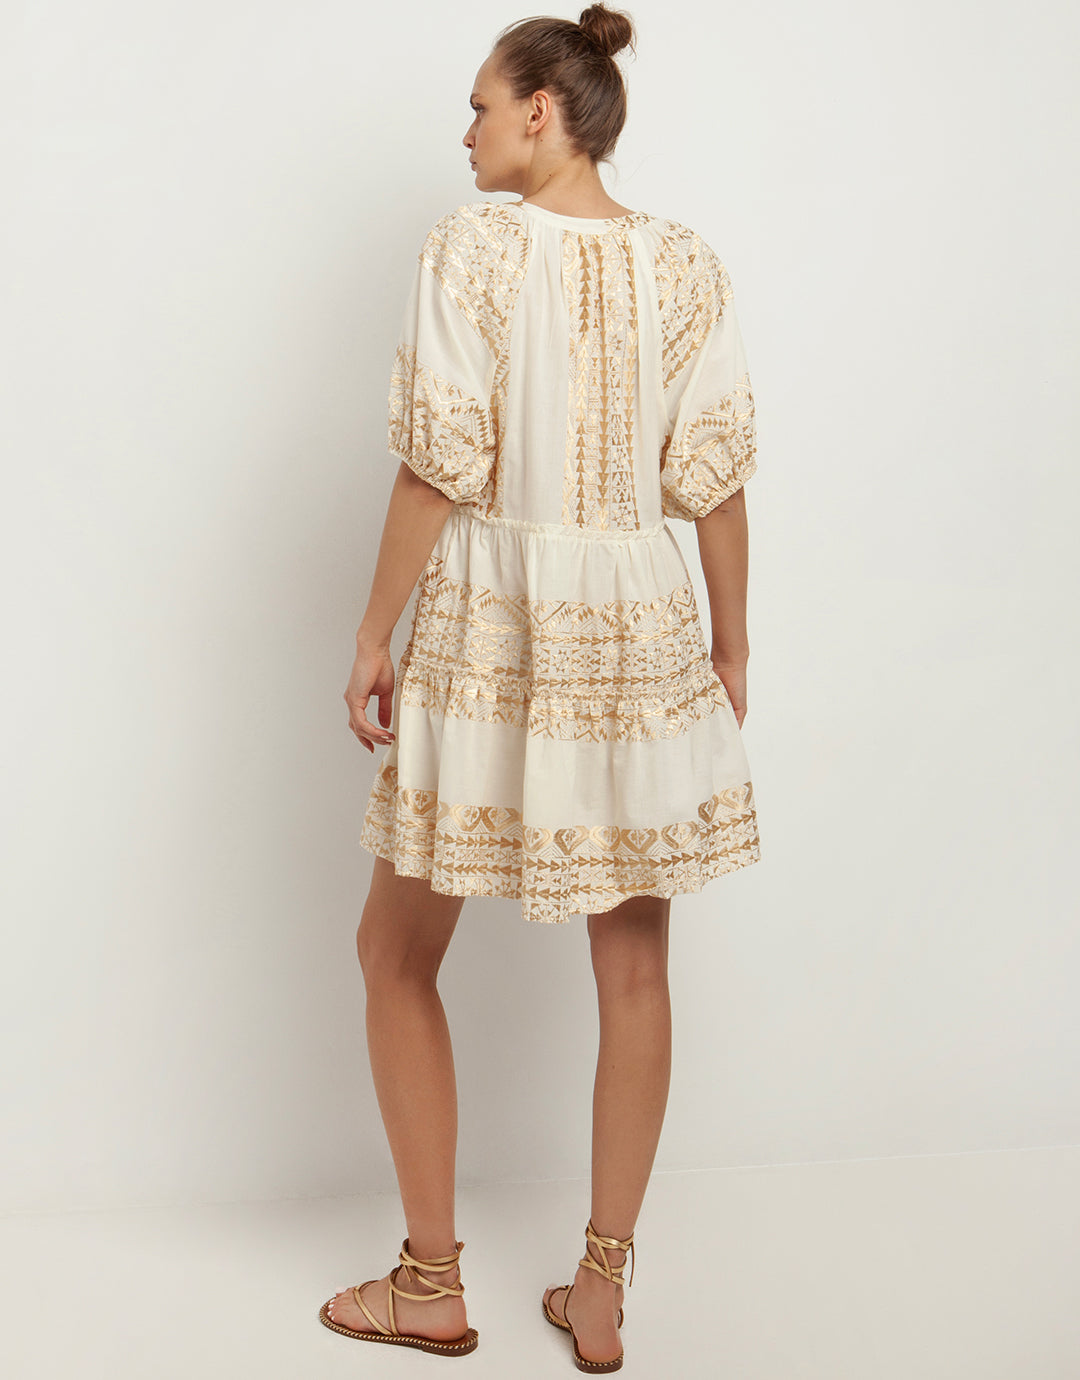 Classic Triangle Mini Dress - Natural and Gold - Simply Beach UK